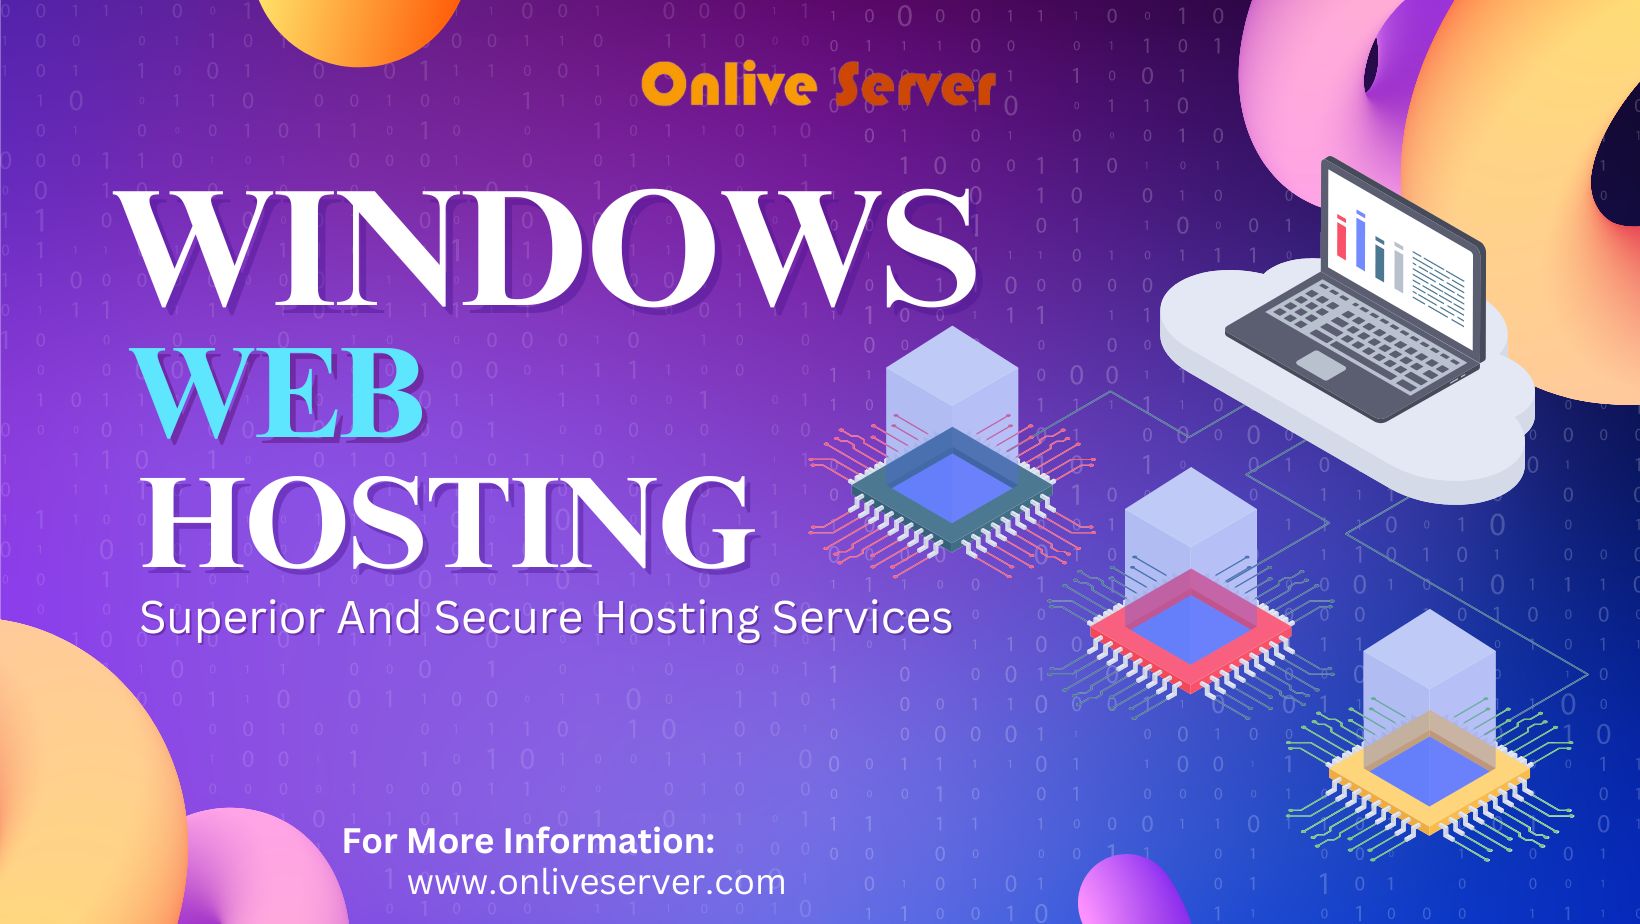 Windows Web Hosting with Enhanced Performance and Speed